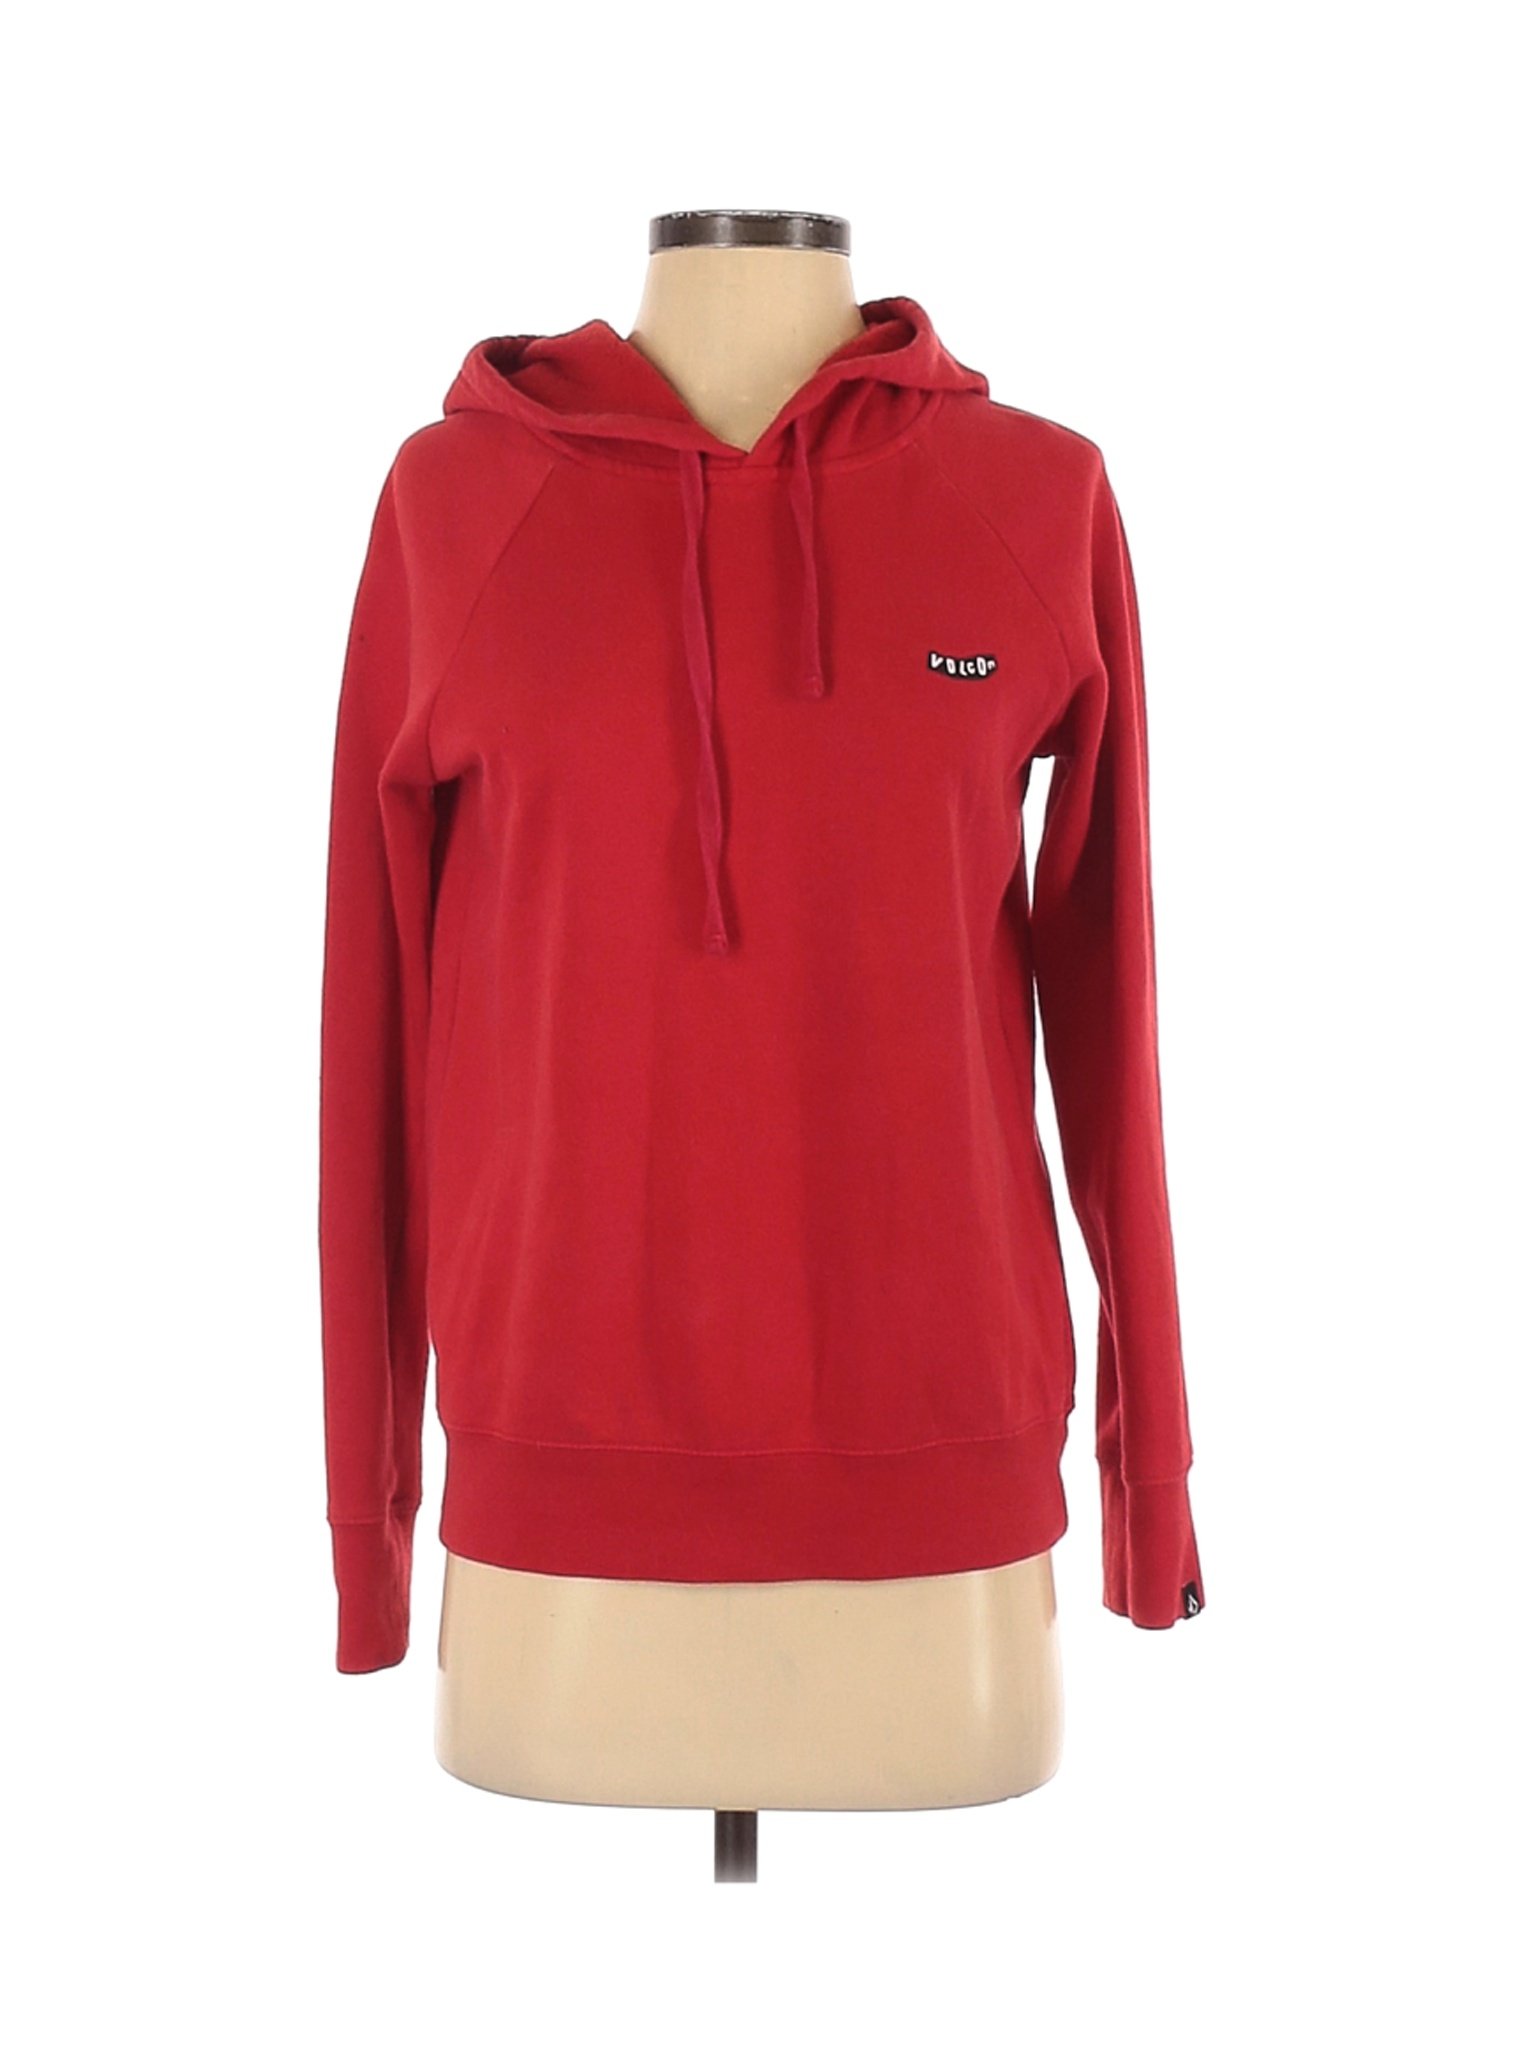 Volcom Solid Red Pullover Hoodie Size XS - 72% off | thredUP